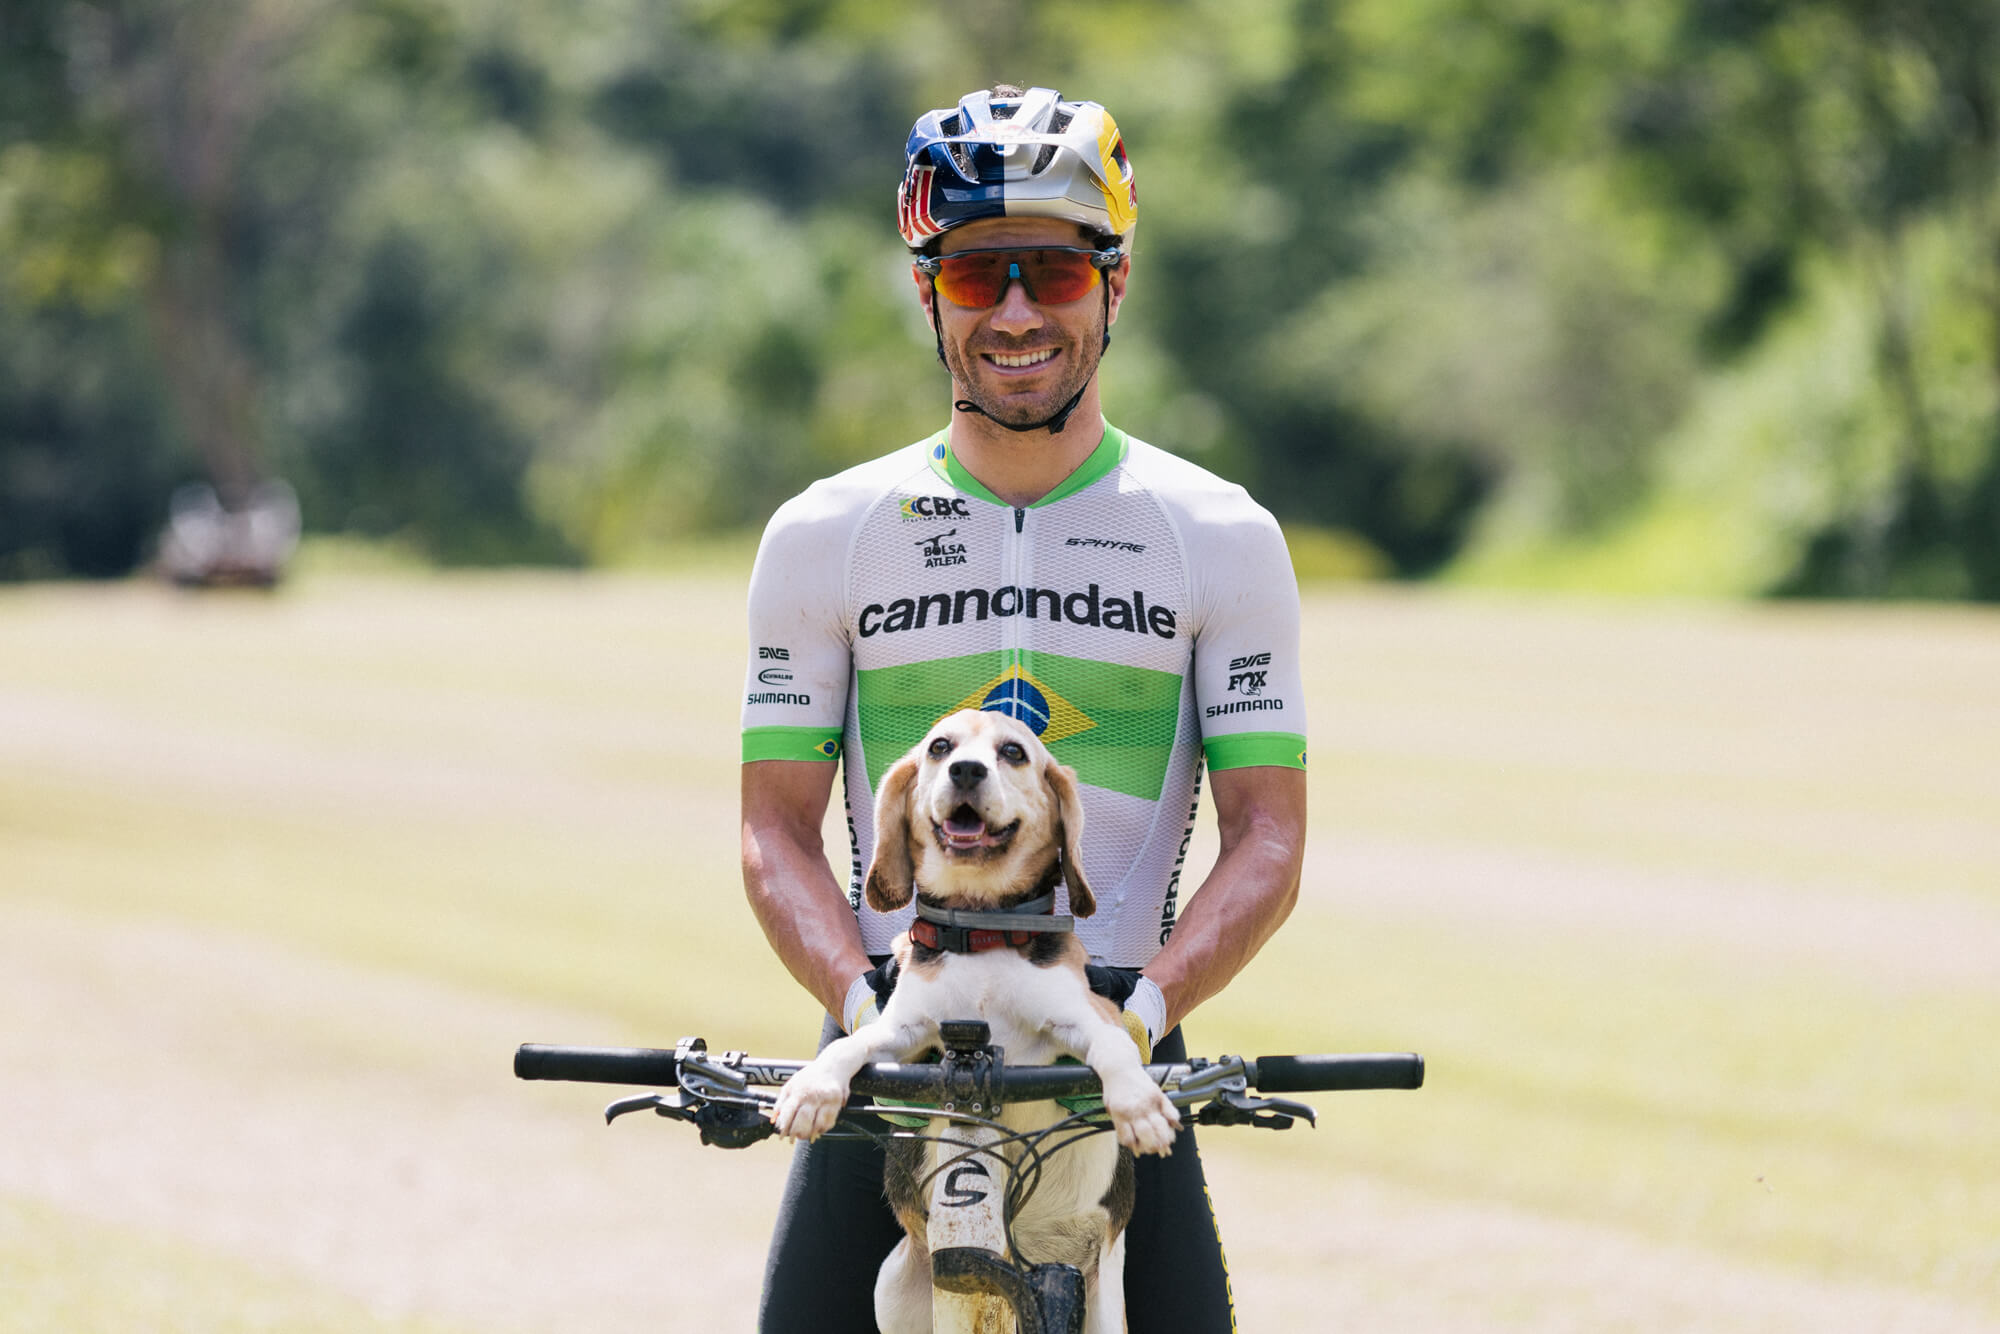 Henrique Avancini hanging out with his dog on the mountain bike